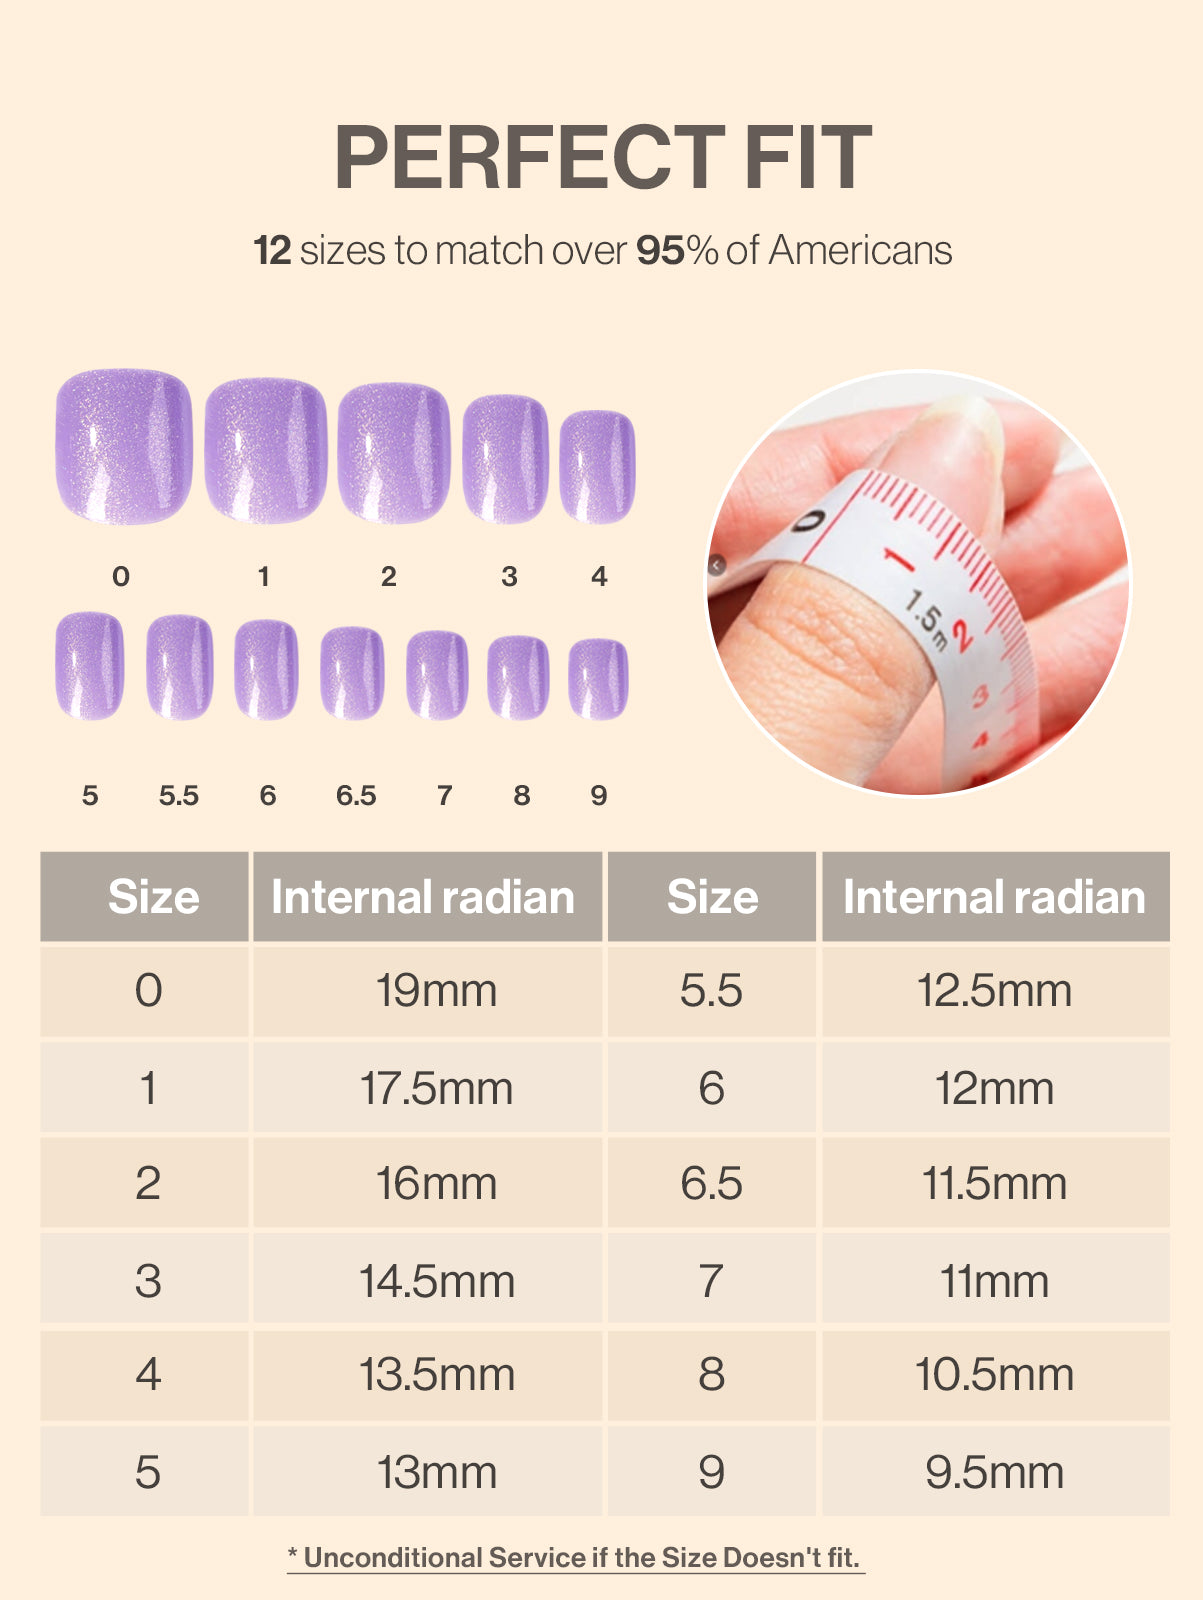 Acrylic Press On Nails - Short Square Purple (US ONLY)